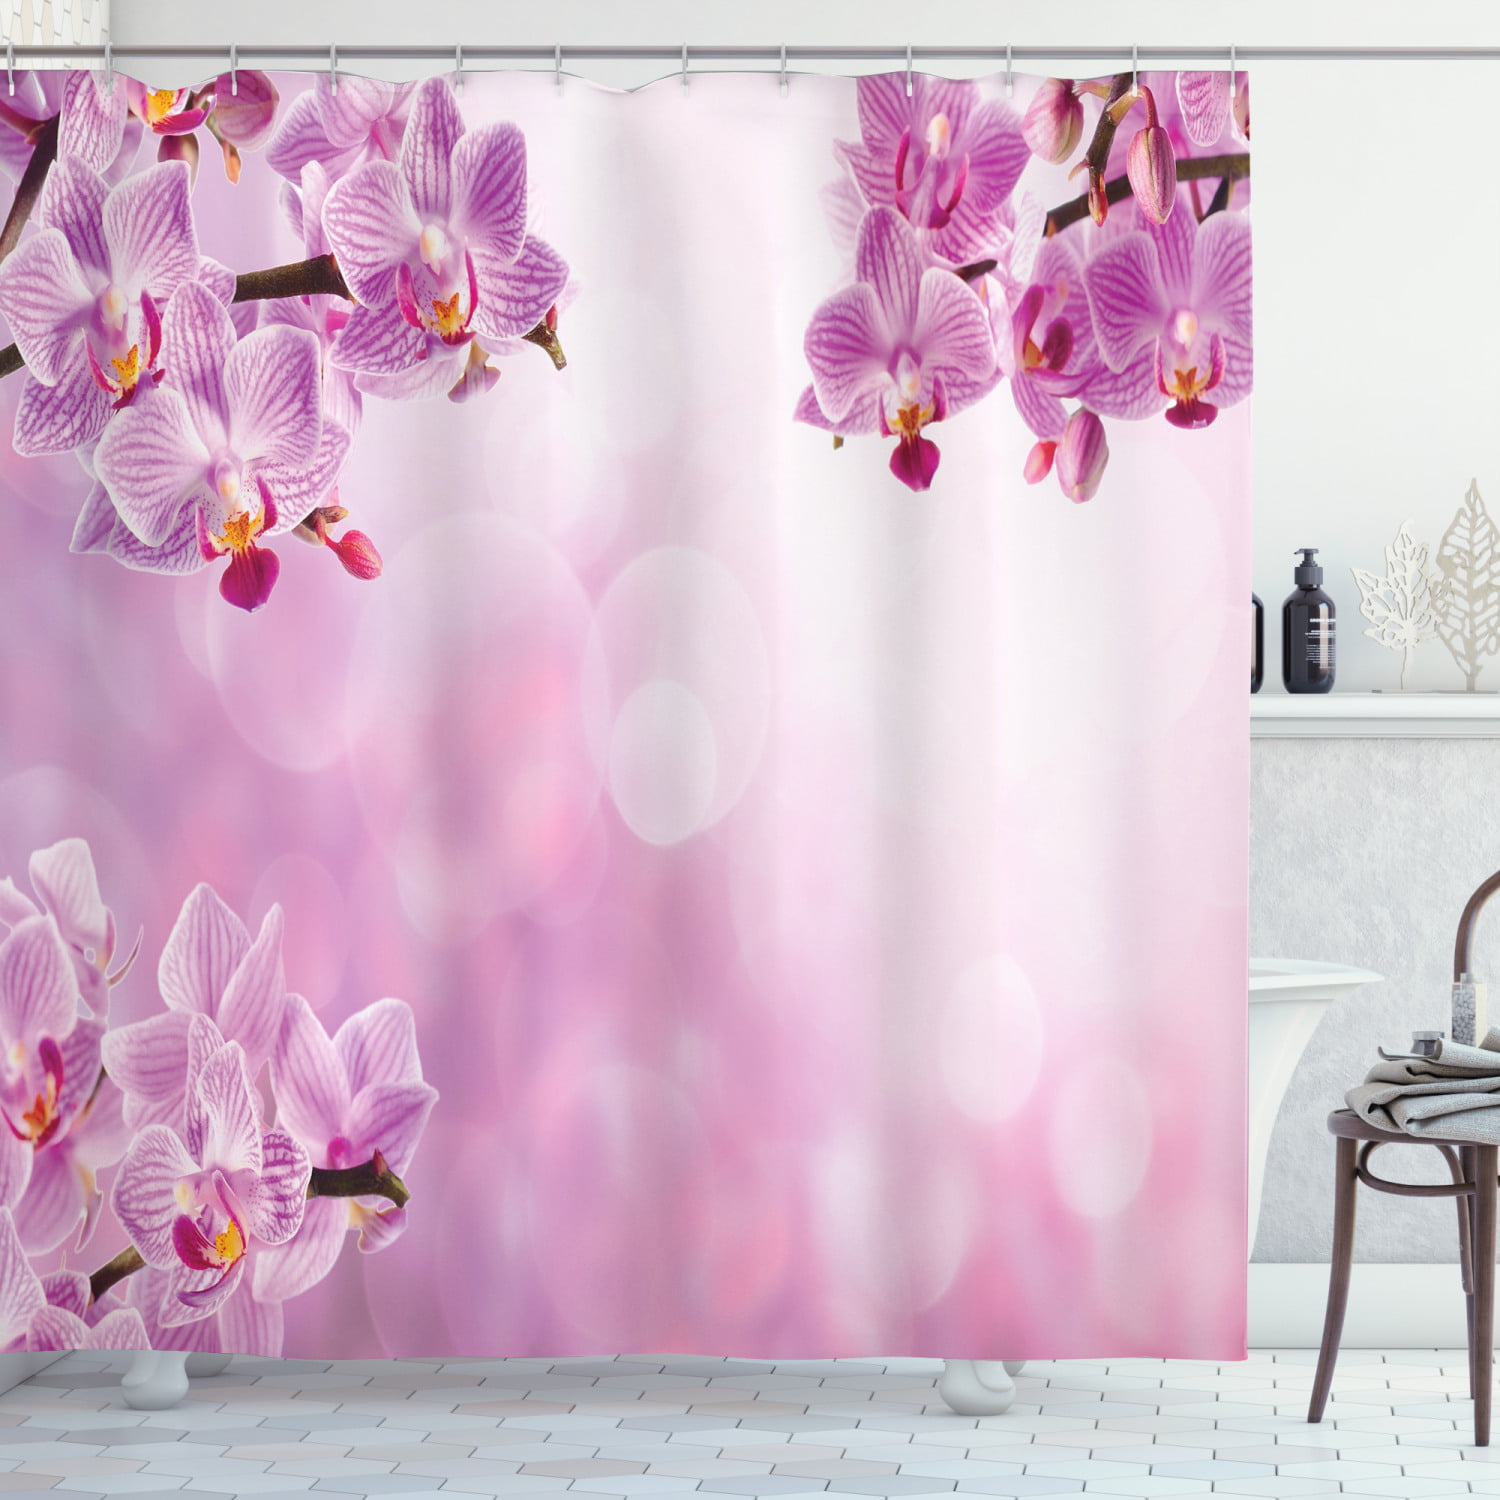 Orchids Flowers Balinese Sea View Scenery Purple Shower Curtain Long 84 Inch 